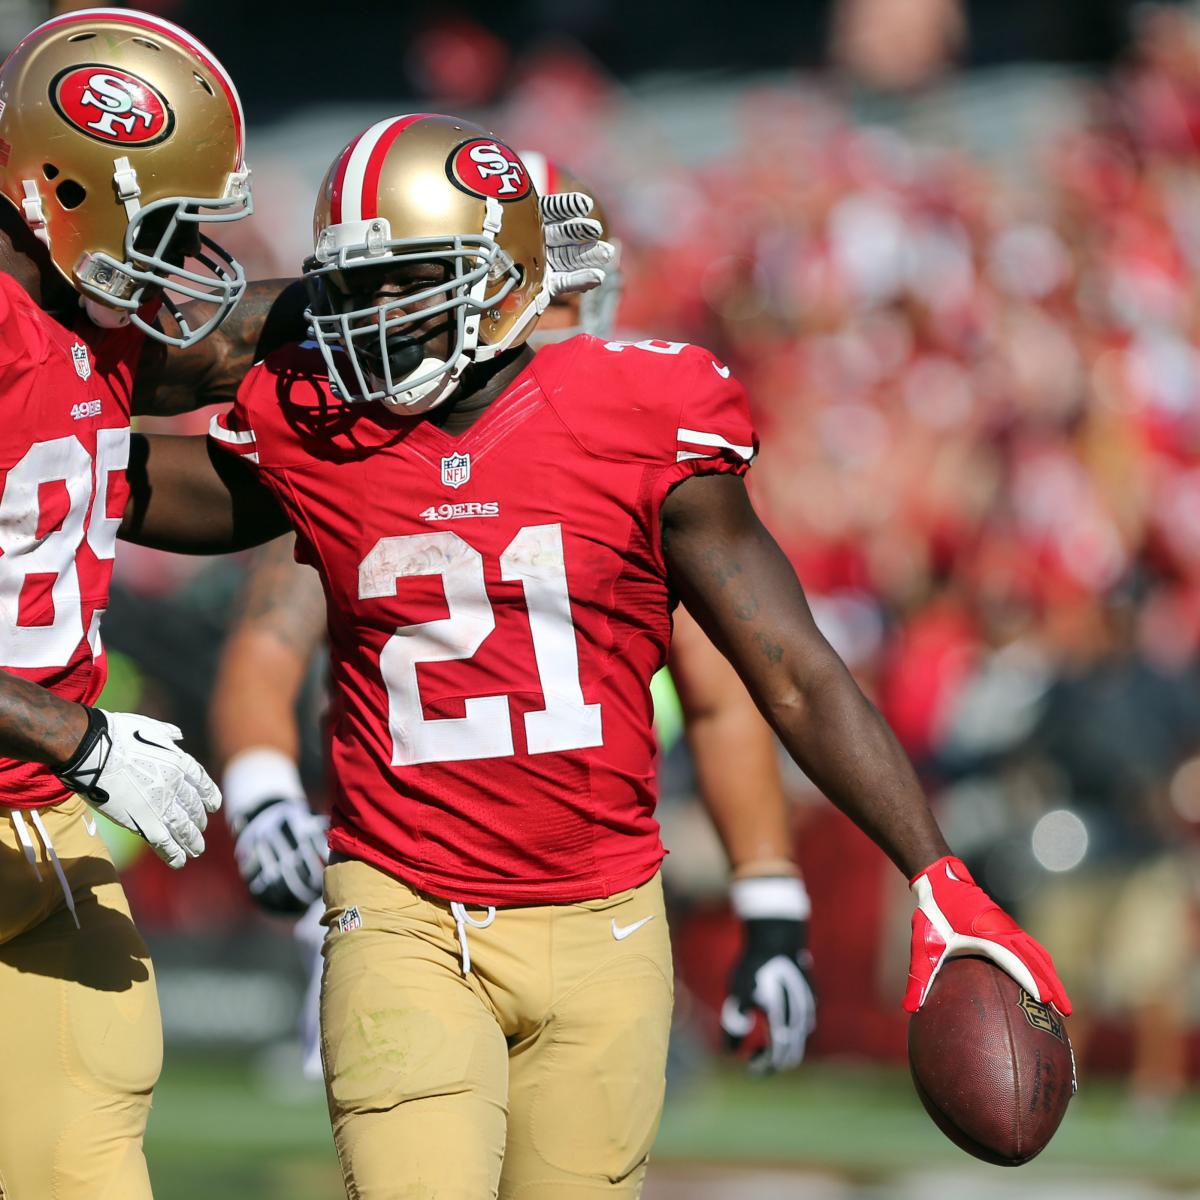 Packers vs. 49ers: Score, Grades and Analysis | Bleacher Report | Latest News, Videos ...1200 x 1200